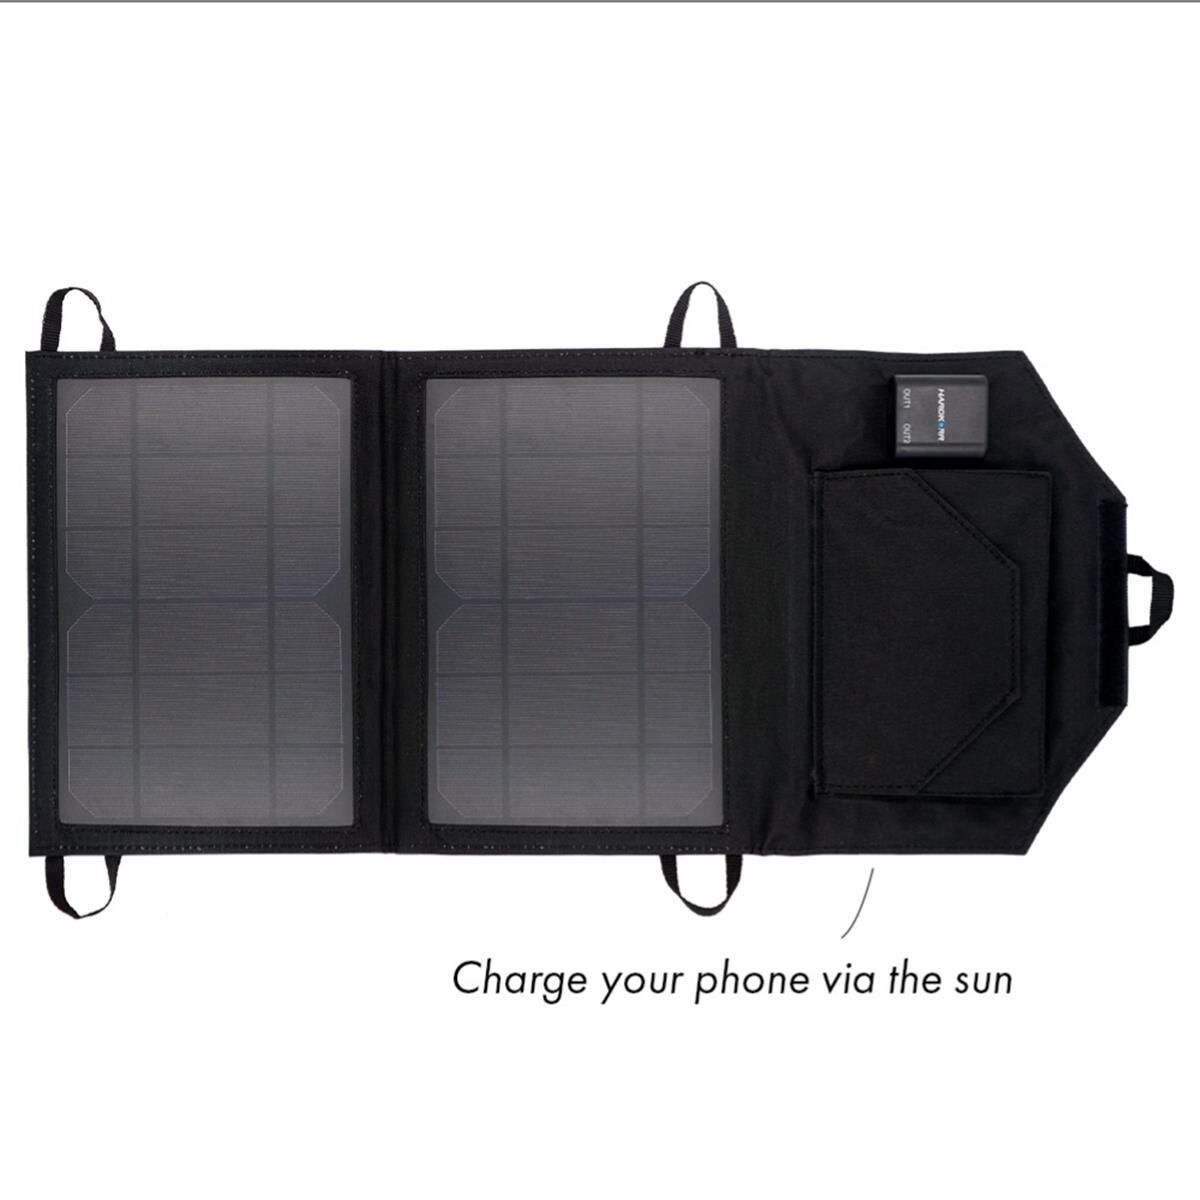 15W DUAL USB SOLAR PHONE / PERSONAL DEVICE CHARGER, , scaau_hi-res